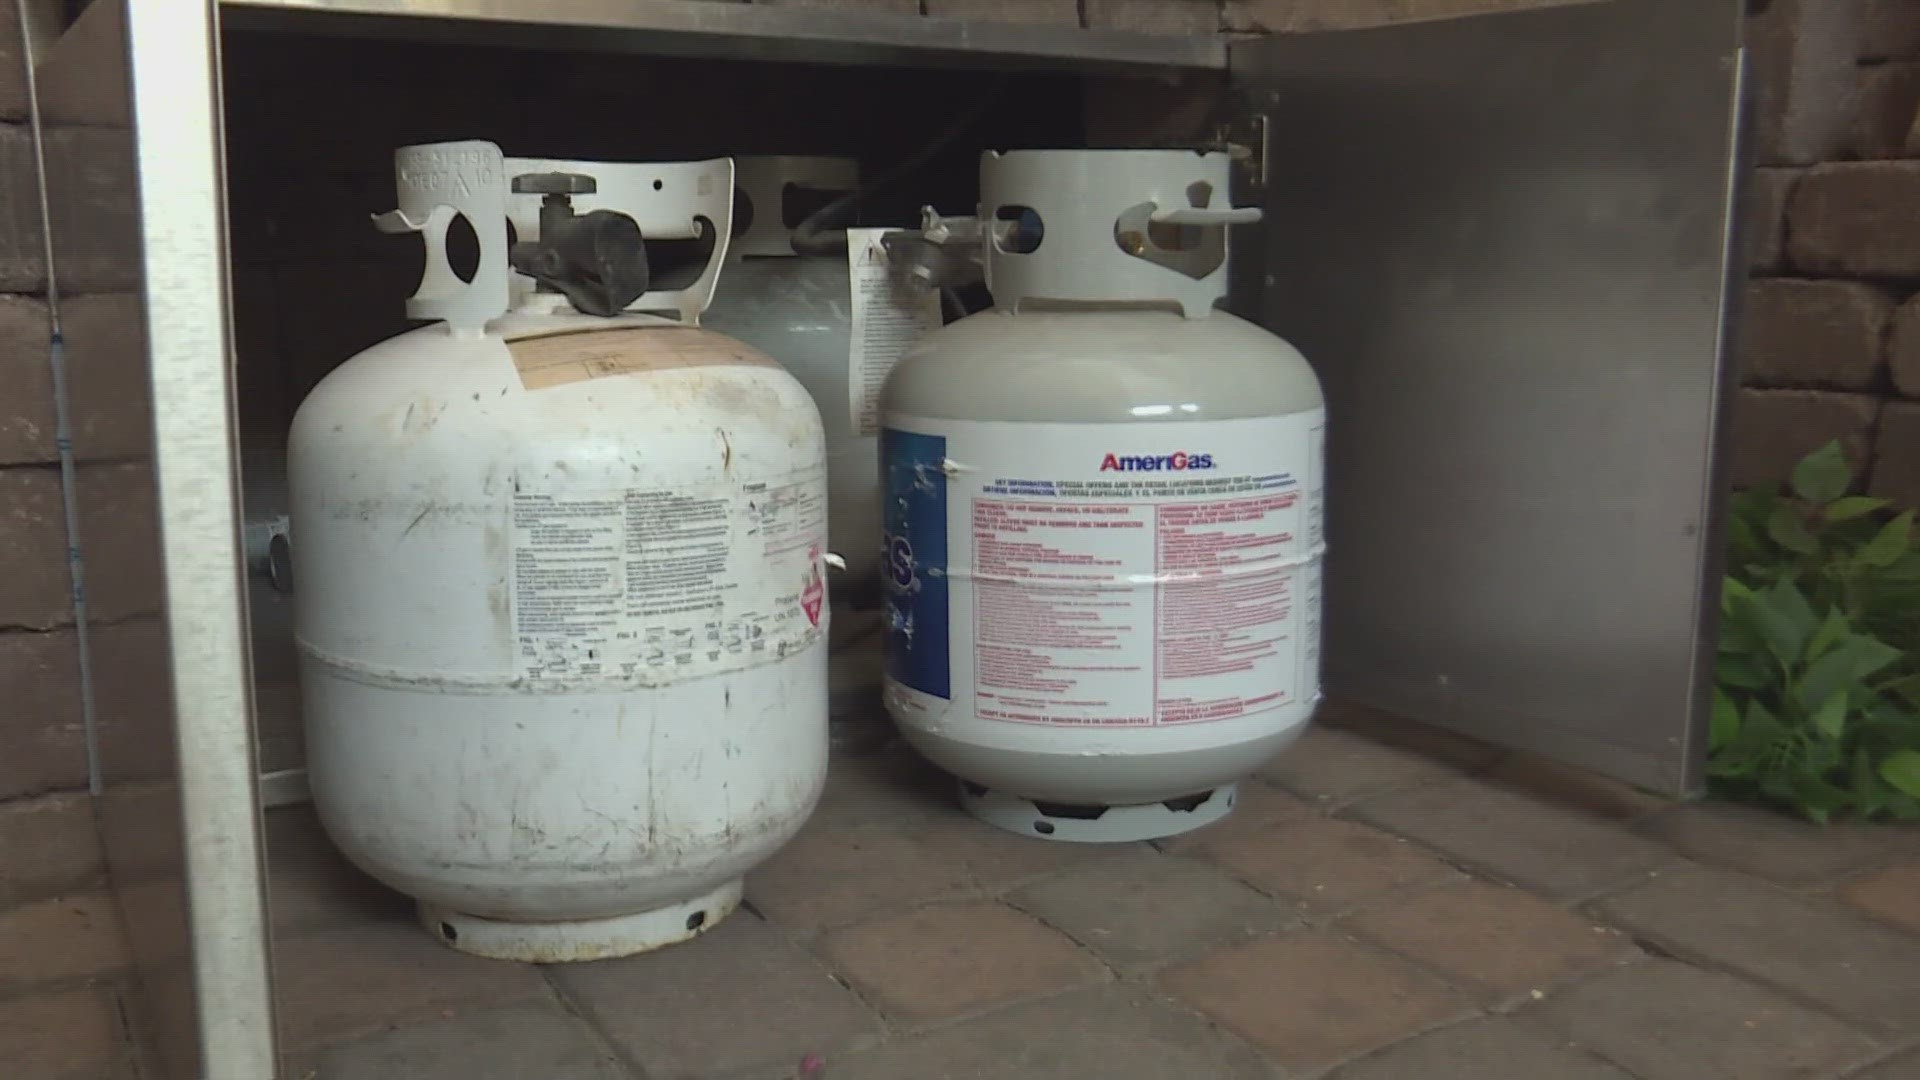 Propane tank safety tips Arizona homeowners should know